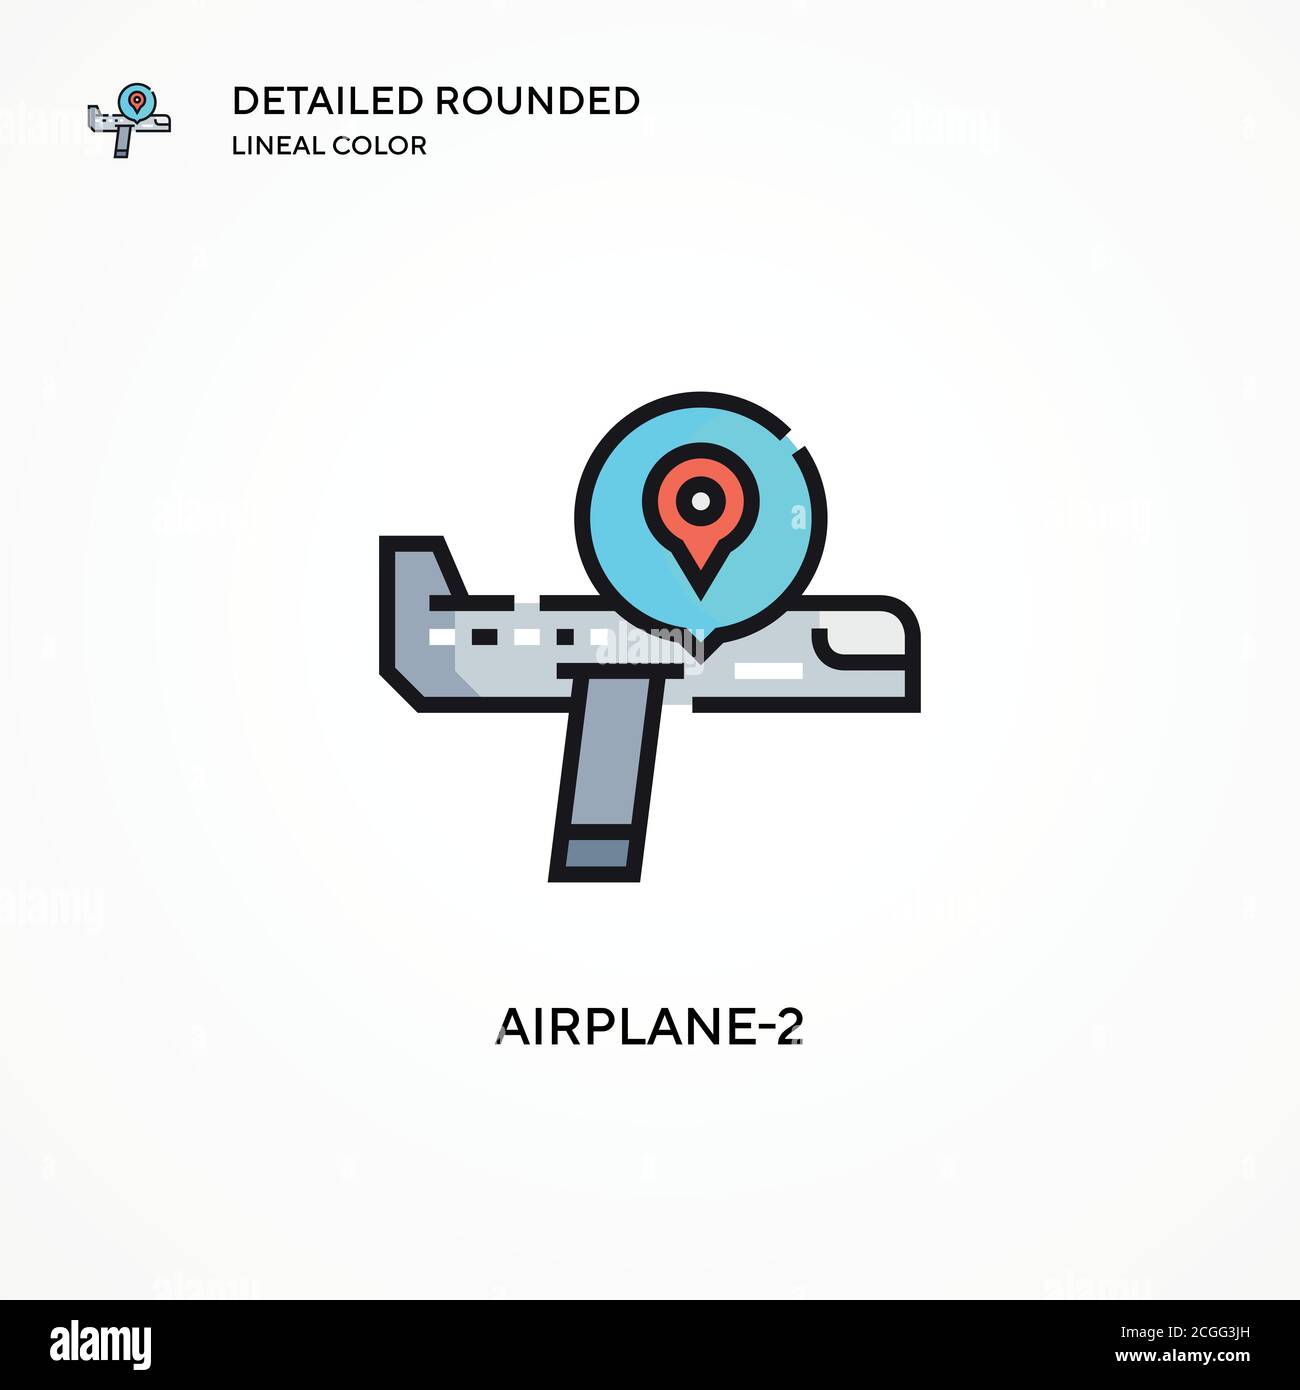 Airplane-2 vector icon. Modern vector illustration concepts. Easy to edit and customize. Stock Vector